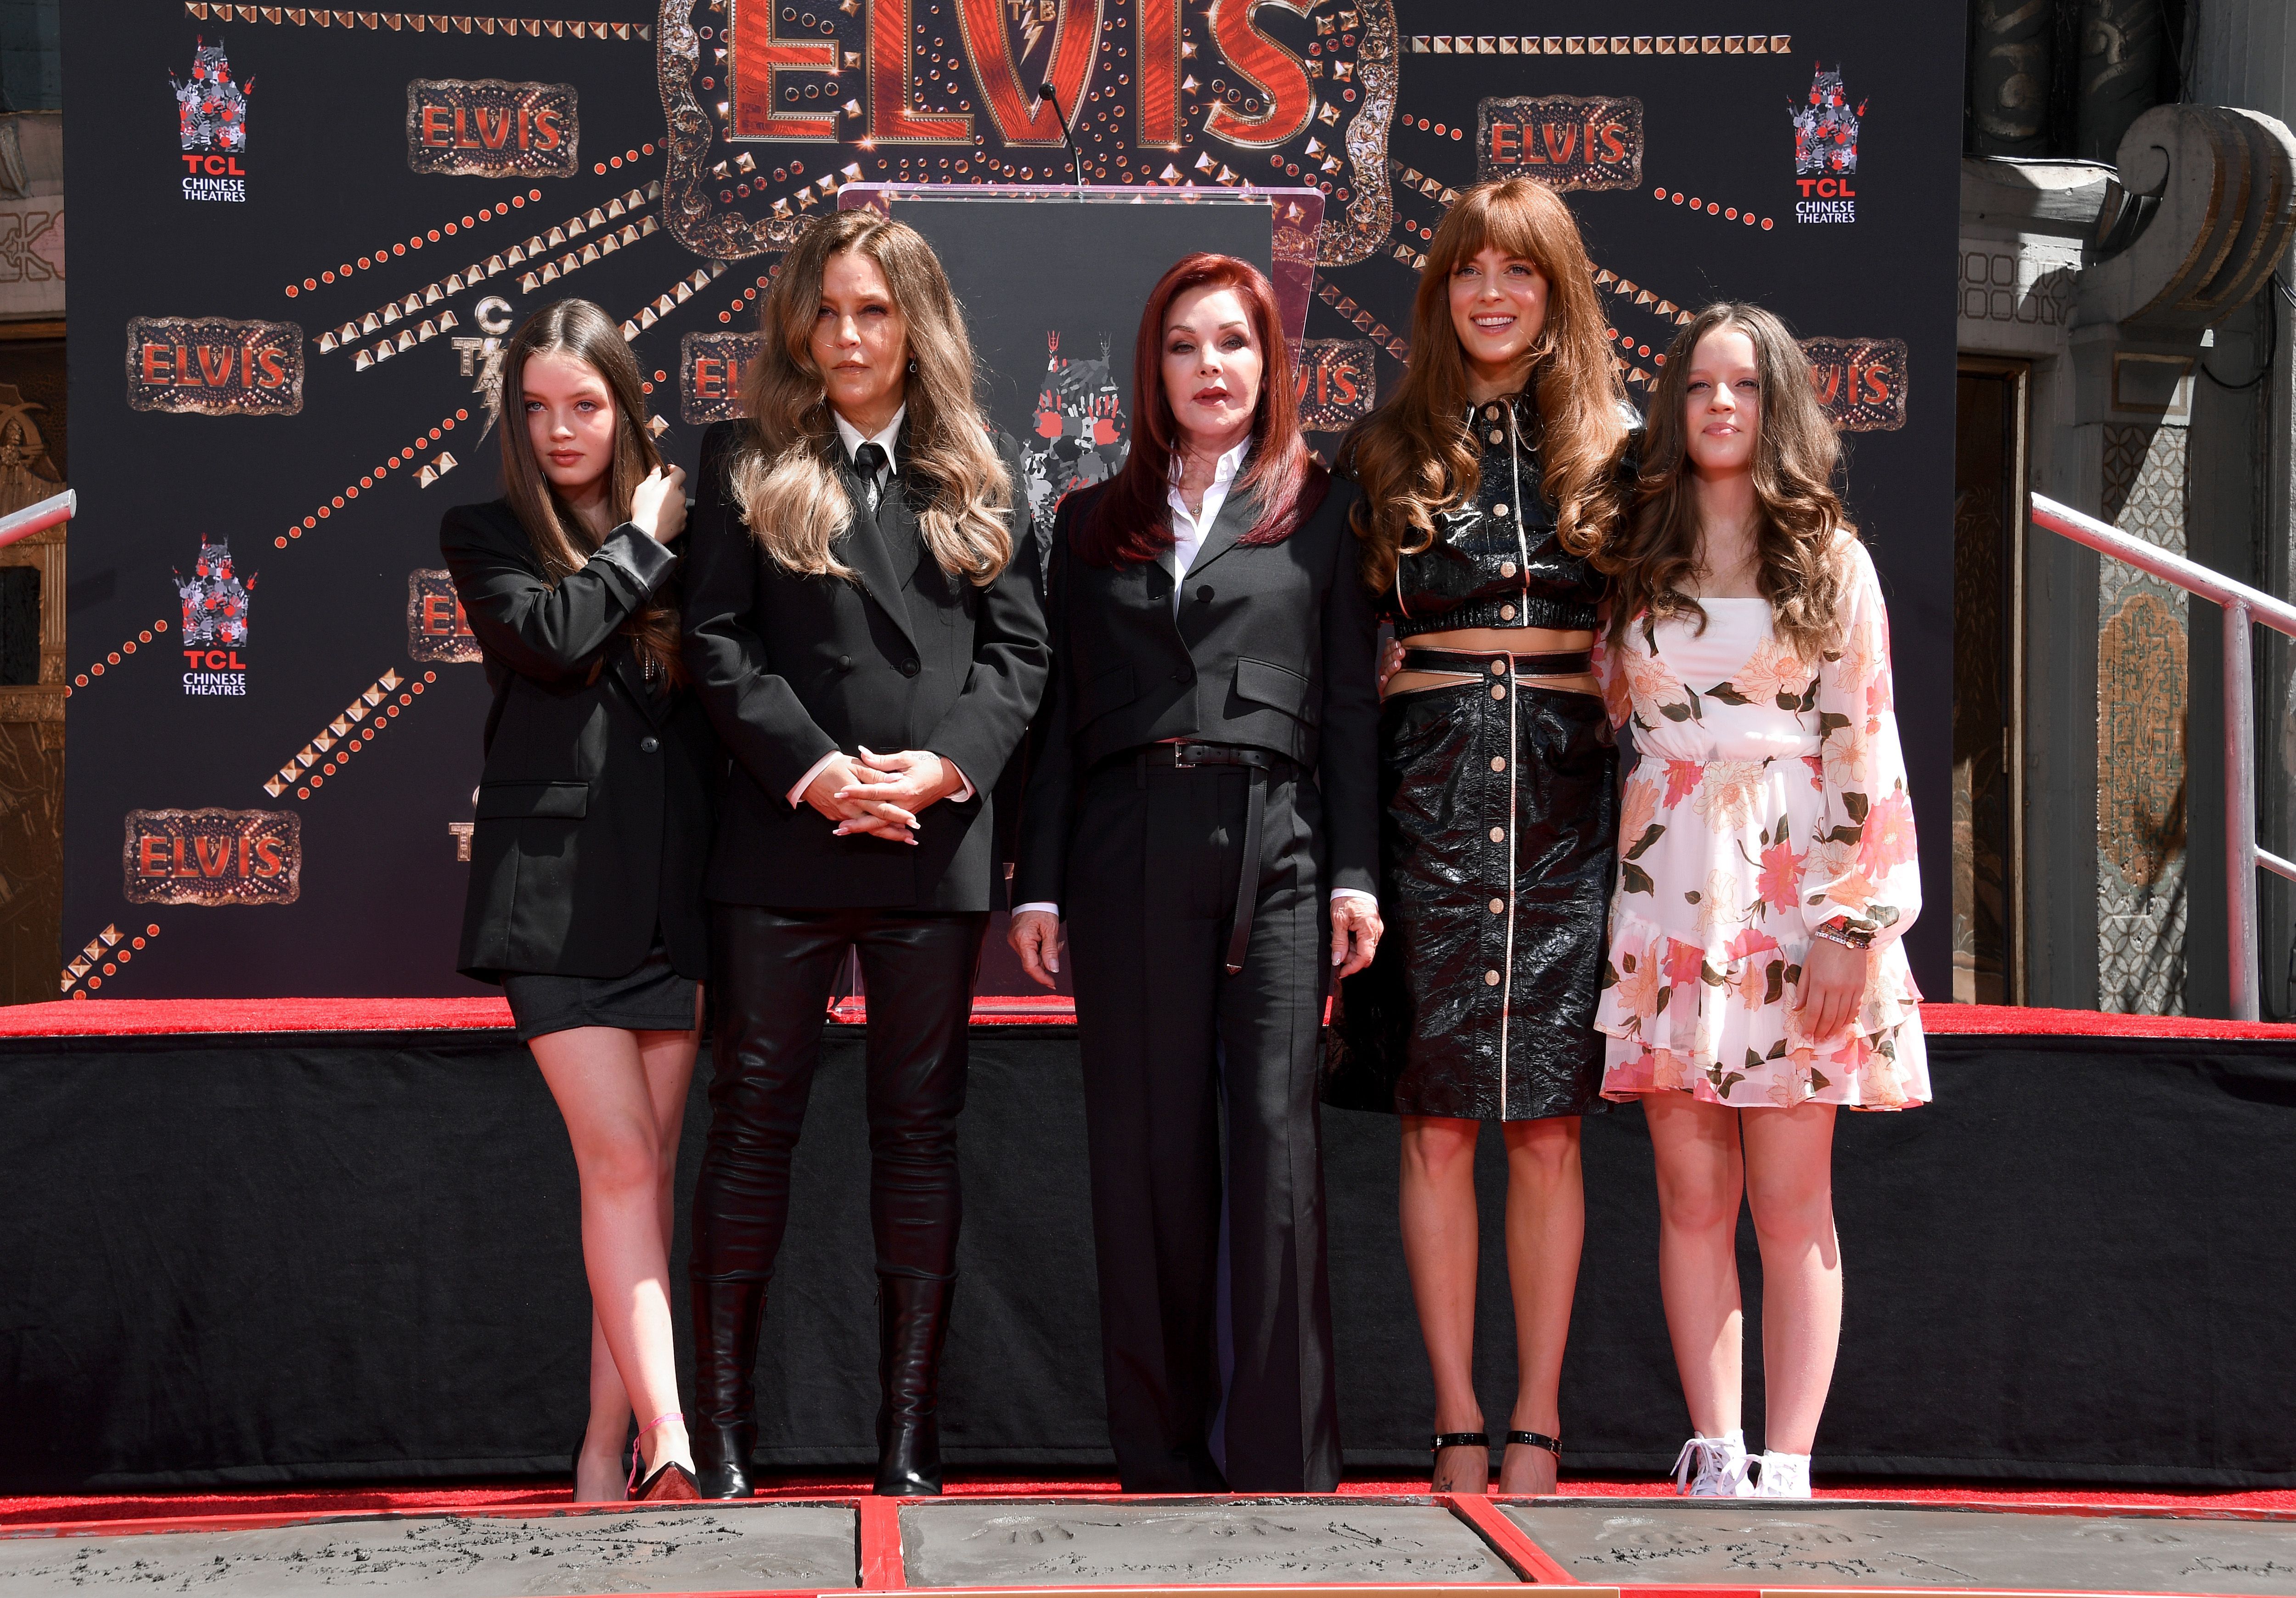 Harper Vivienne Ann Lockwood, Lisa Marie Presley, Priscilla Presley, Riley Keough, and Finley Aaron Love Lockwood during the Handprint Ceremony honoring Three Generations of Presley's at TCL Chinese Theatre in Hollywood, California on June 21, 2022 | Source: Getty Images